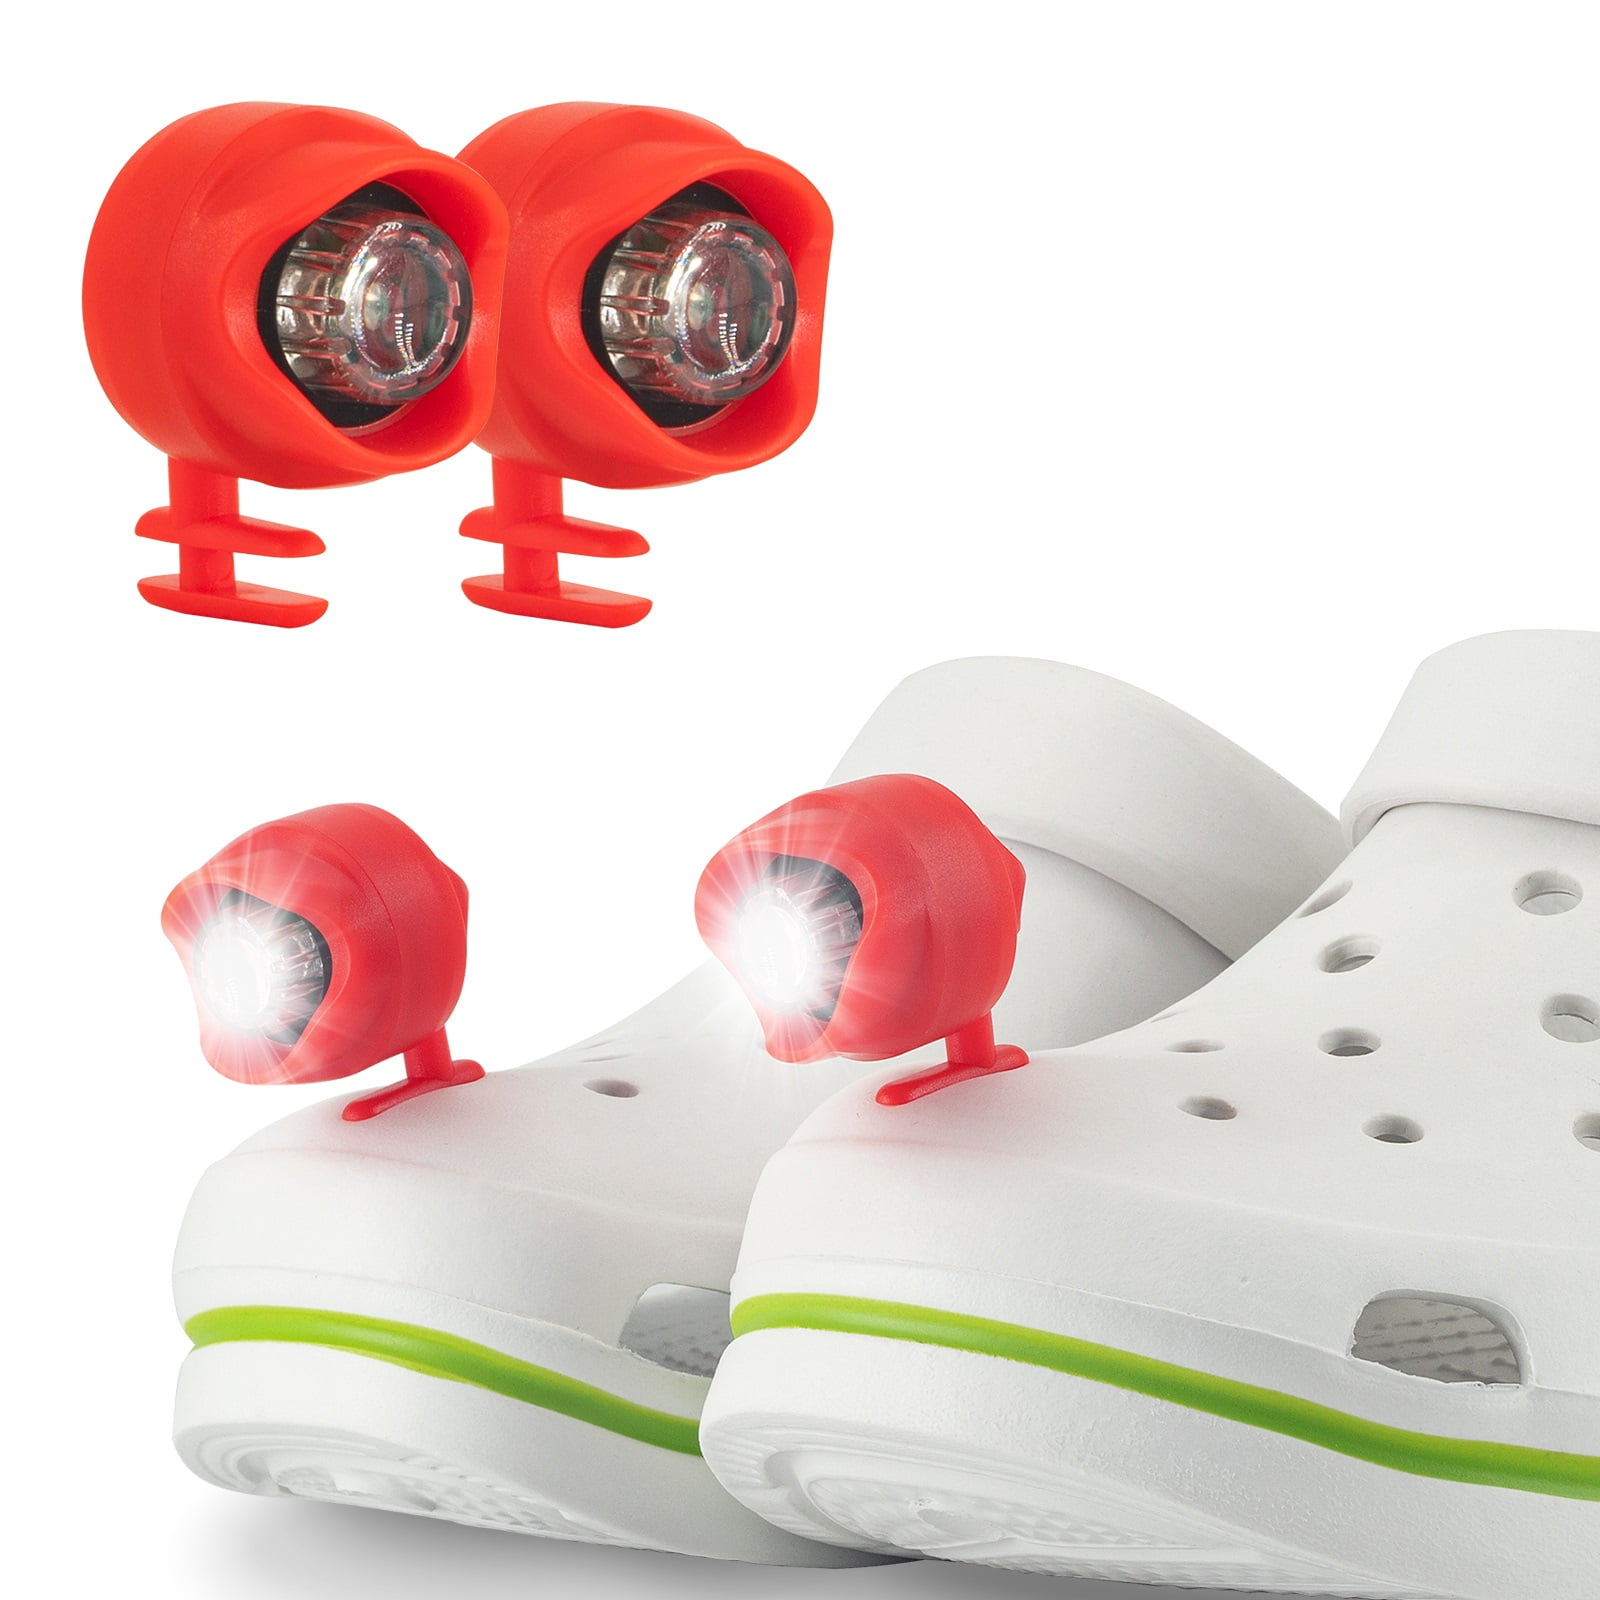 PeaTop 2X Headlights for Croc Shoe Decoration Accessories for Running ...